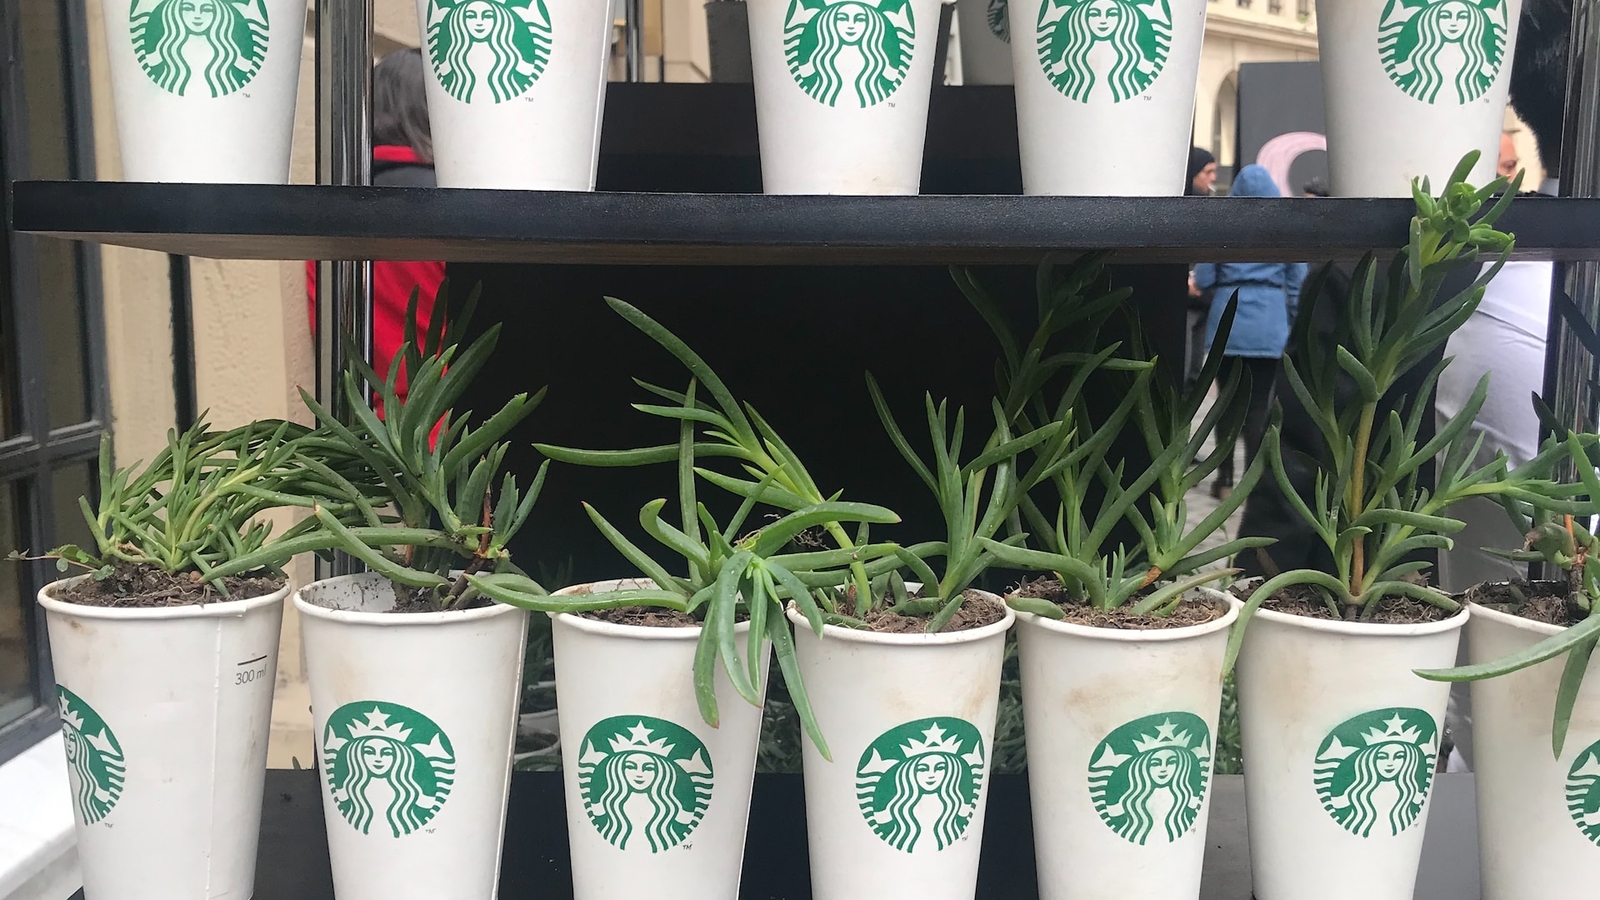 Several small potted plants growing in white cups with a well-known coffee brand logo, displayed on black metal shelves.